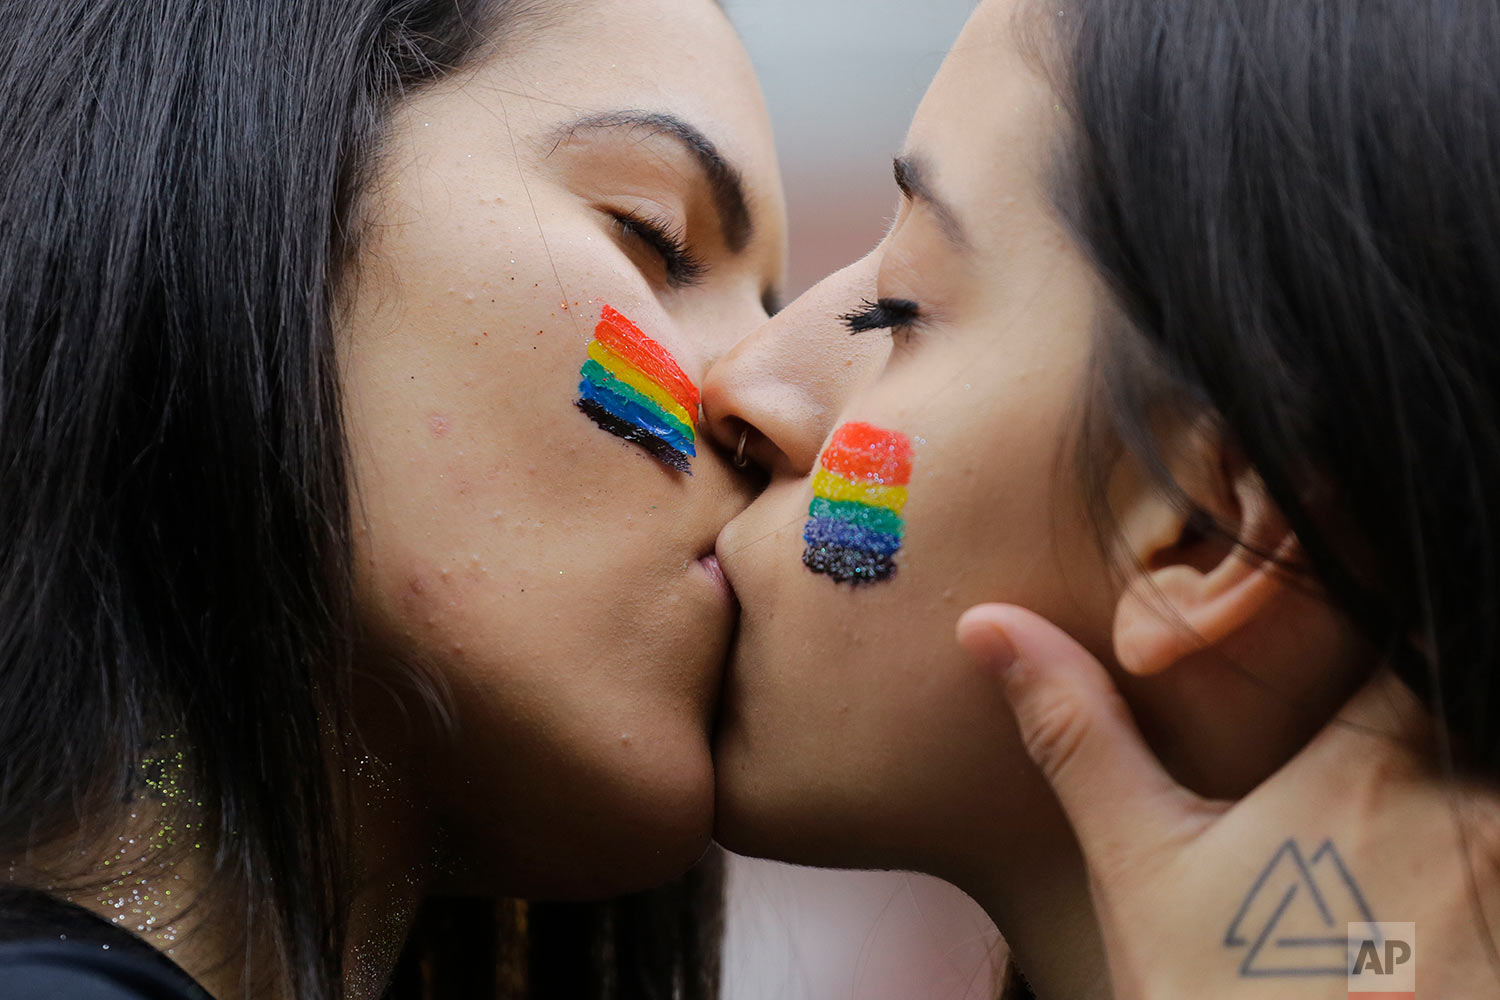  Revelers kiss during the annual gay pride parade in Sao Paulo, Brazil, June 3, 2018. (AP Photo/Nelson Antoine) 